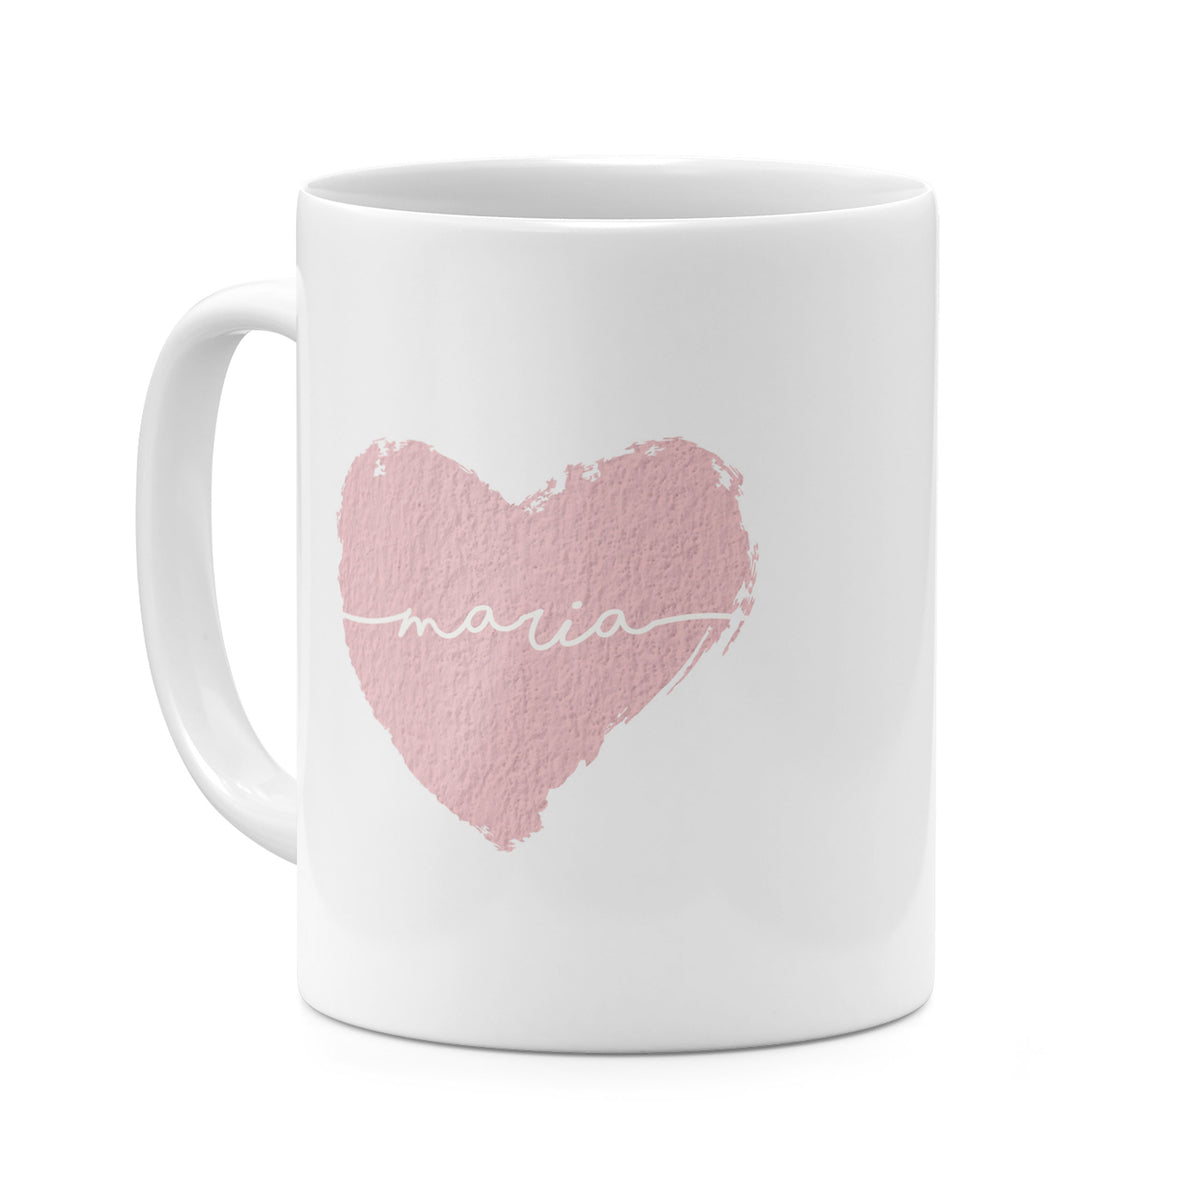 Personalised Ceramic Mug with Name Initials Text Grunge Pink Heart